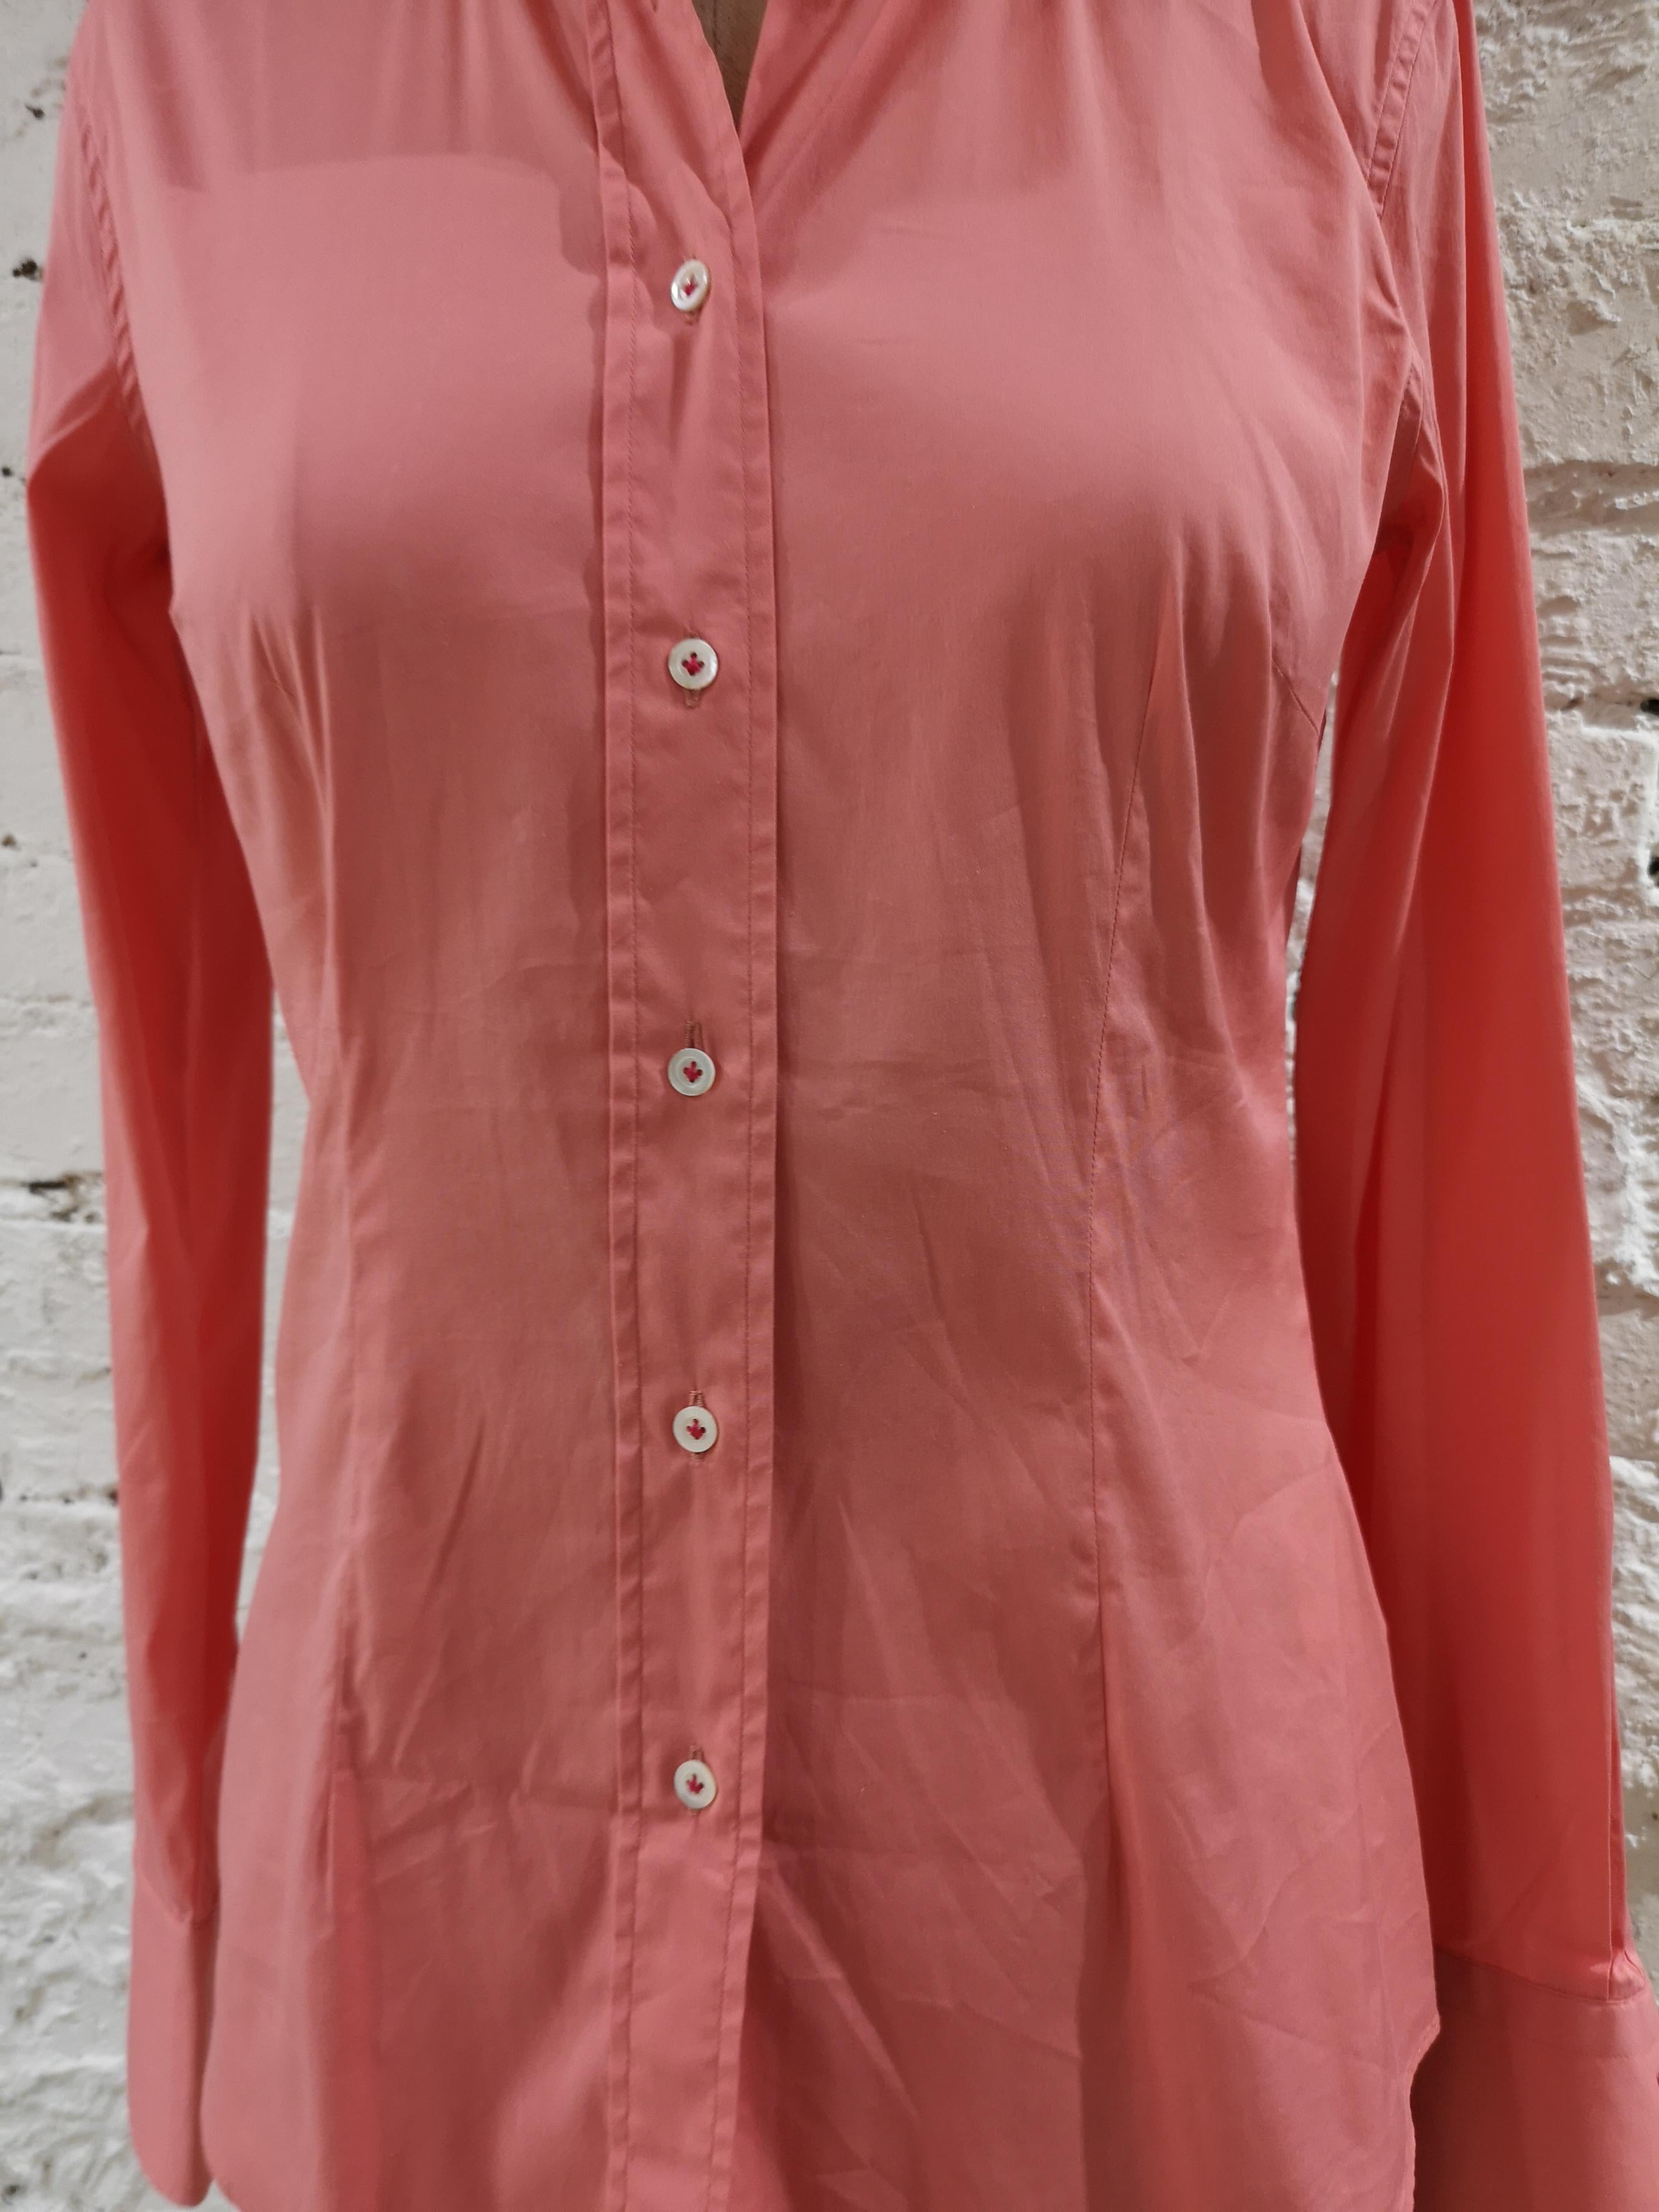 Mauro Grifoni pink cotton shirt
totally made in italy in size 42